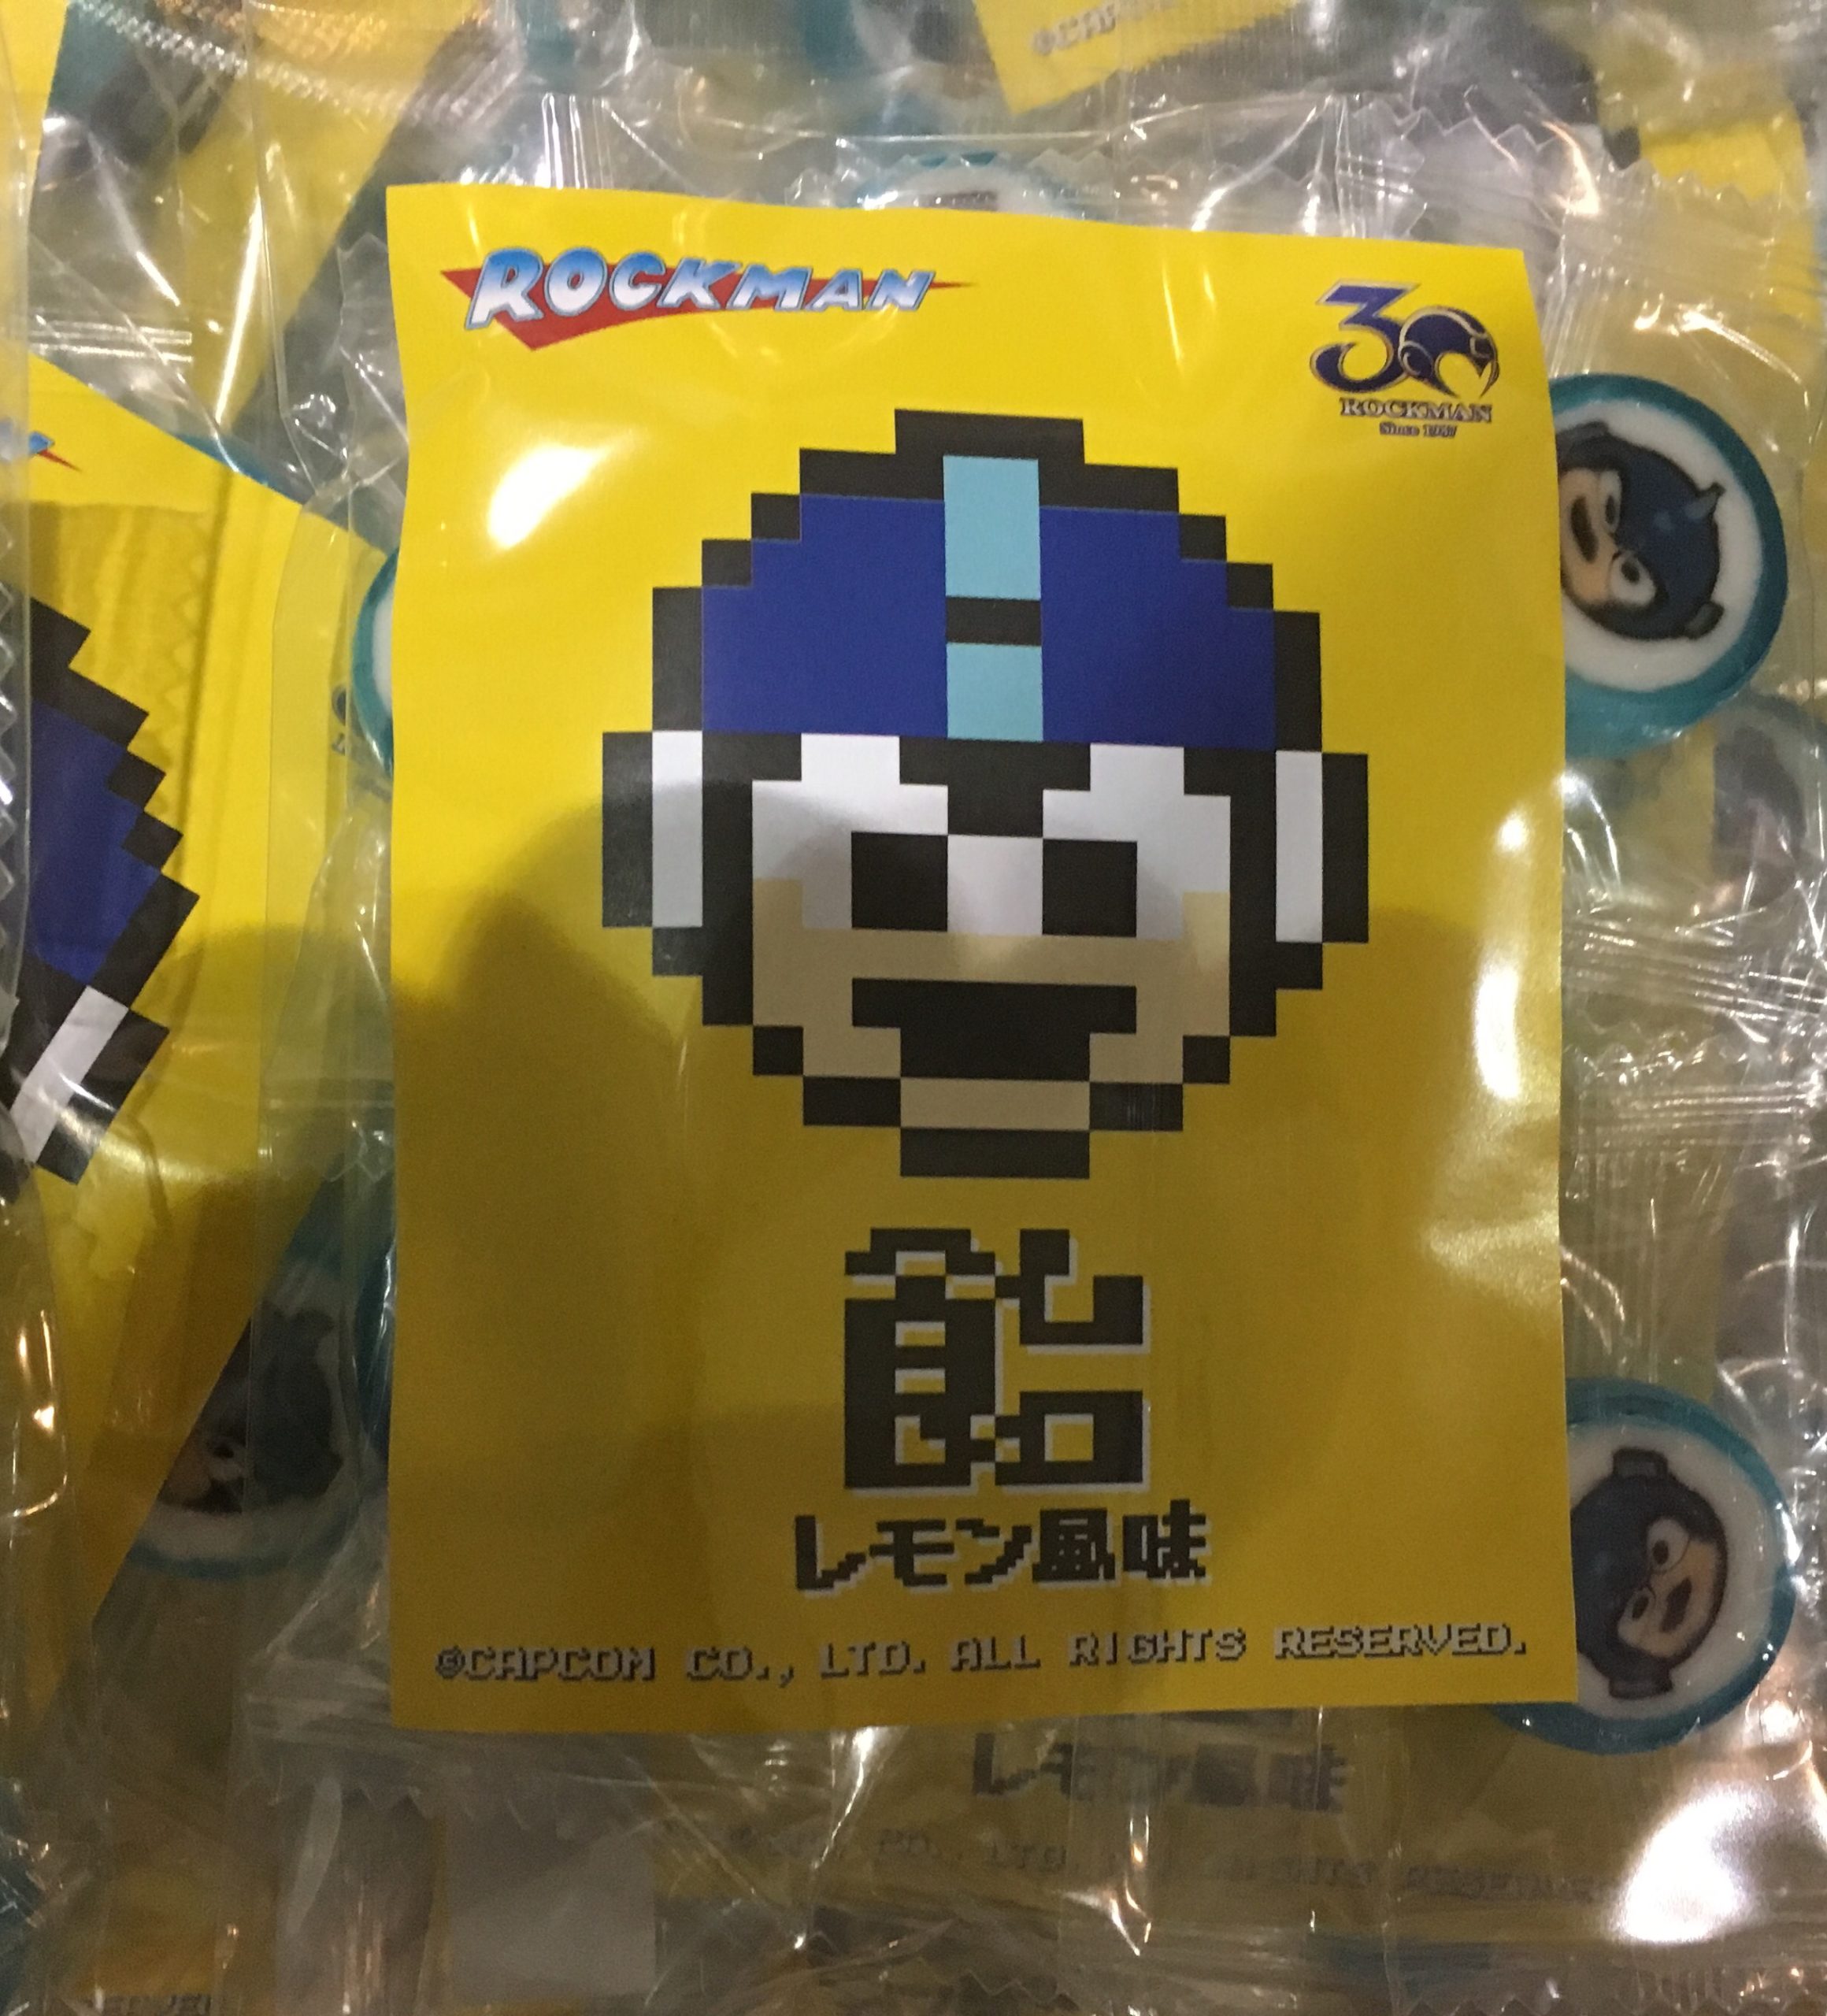 The Most Amazing Things You Can Buy At Tokyo Game Show